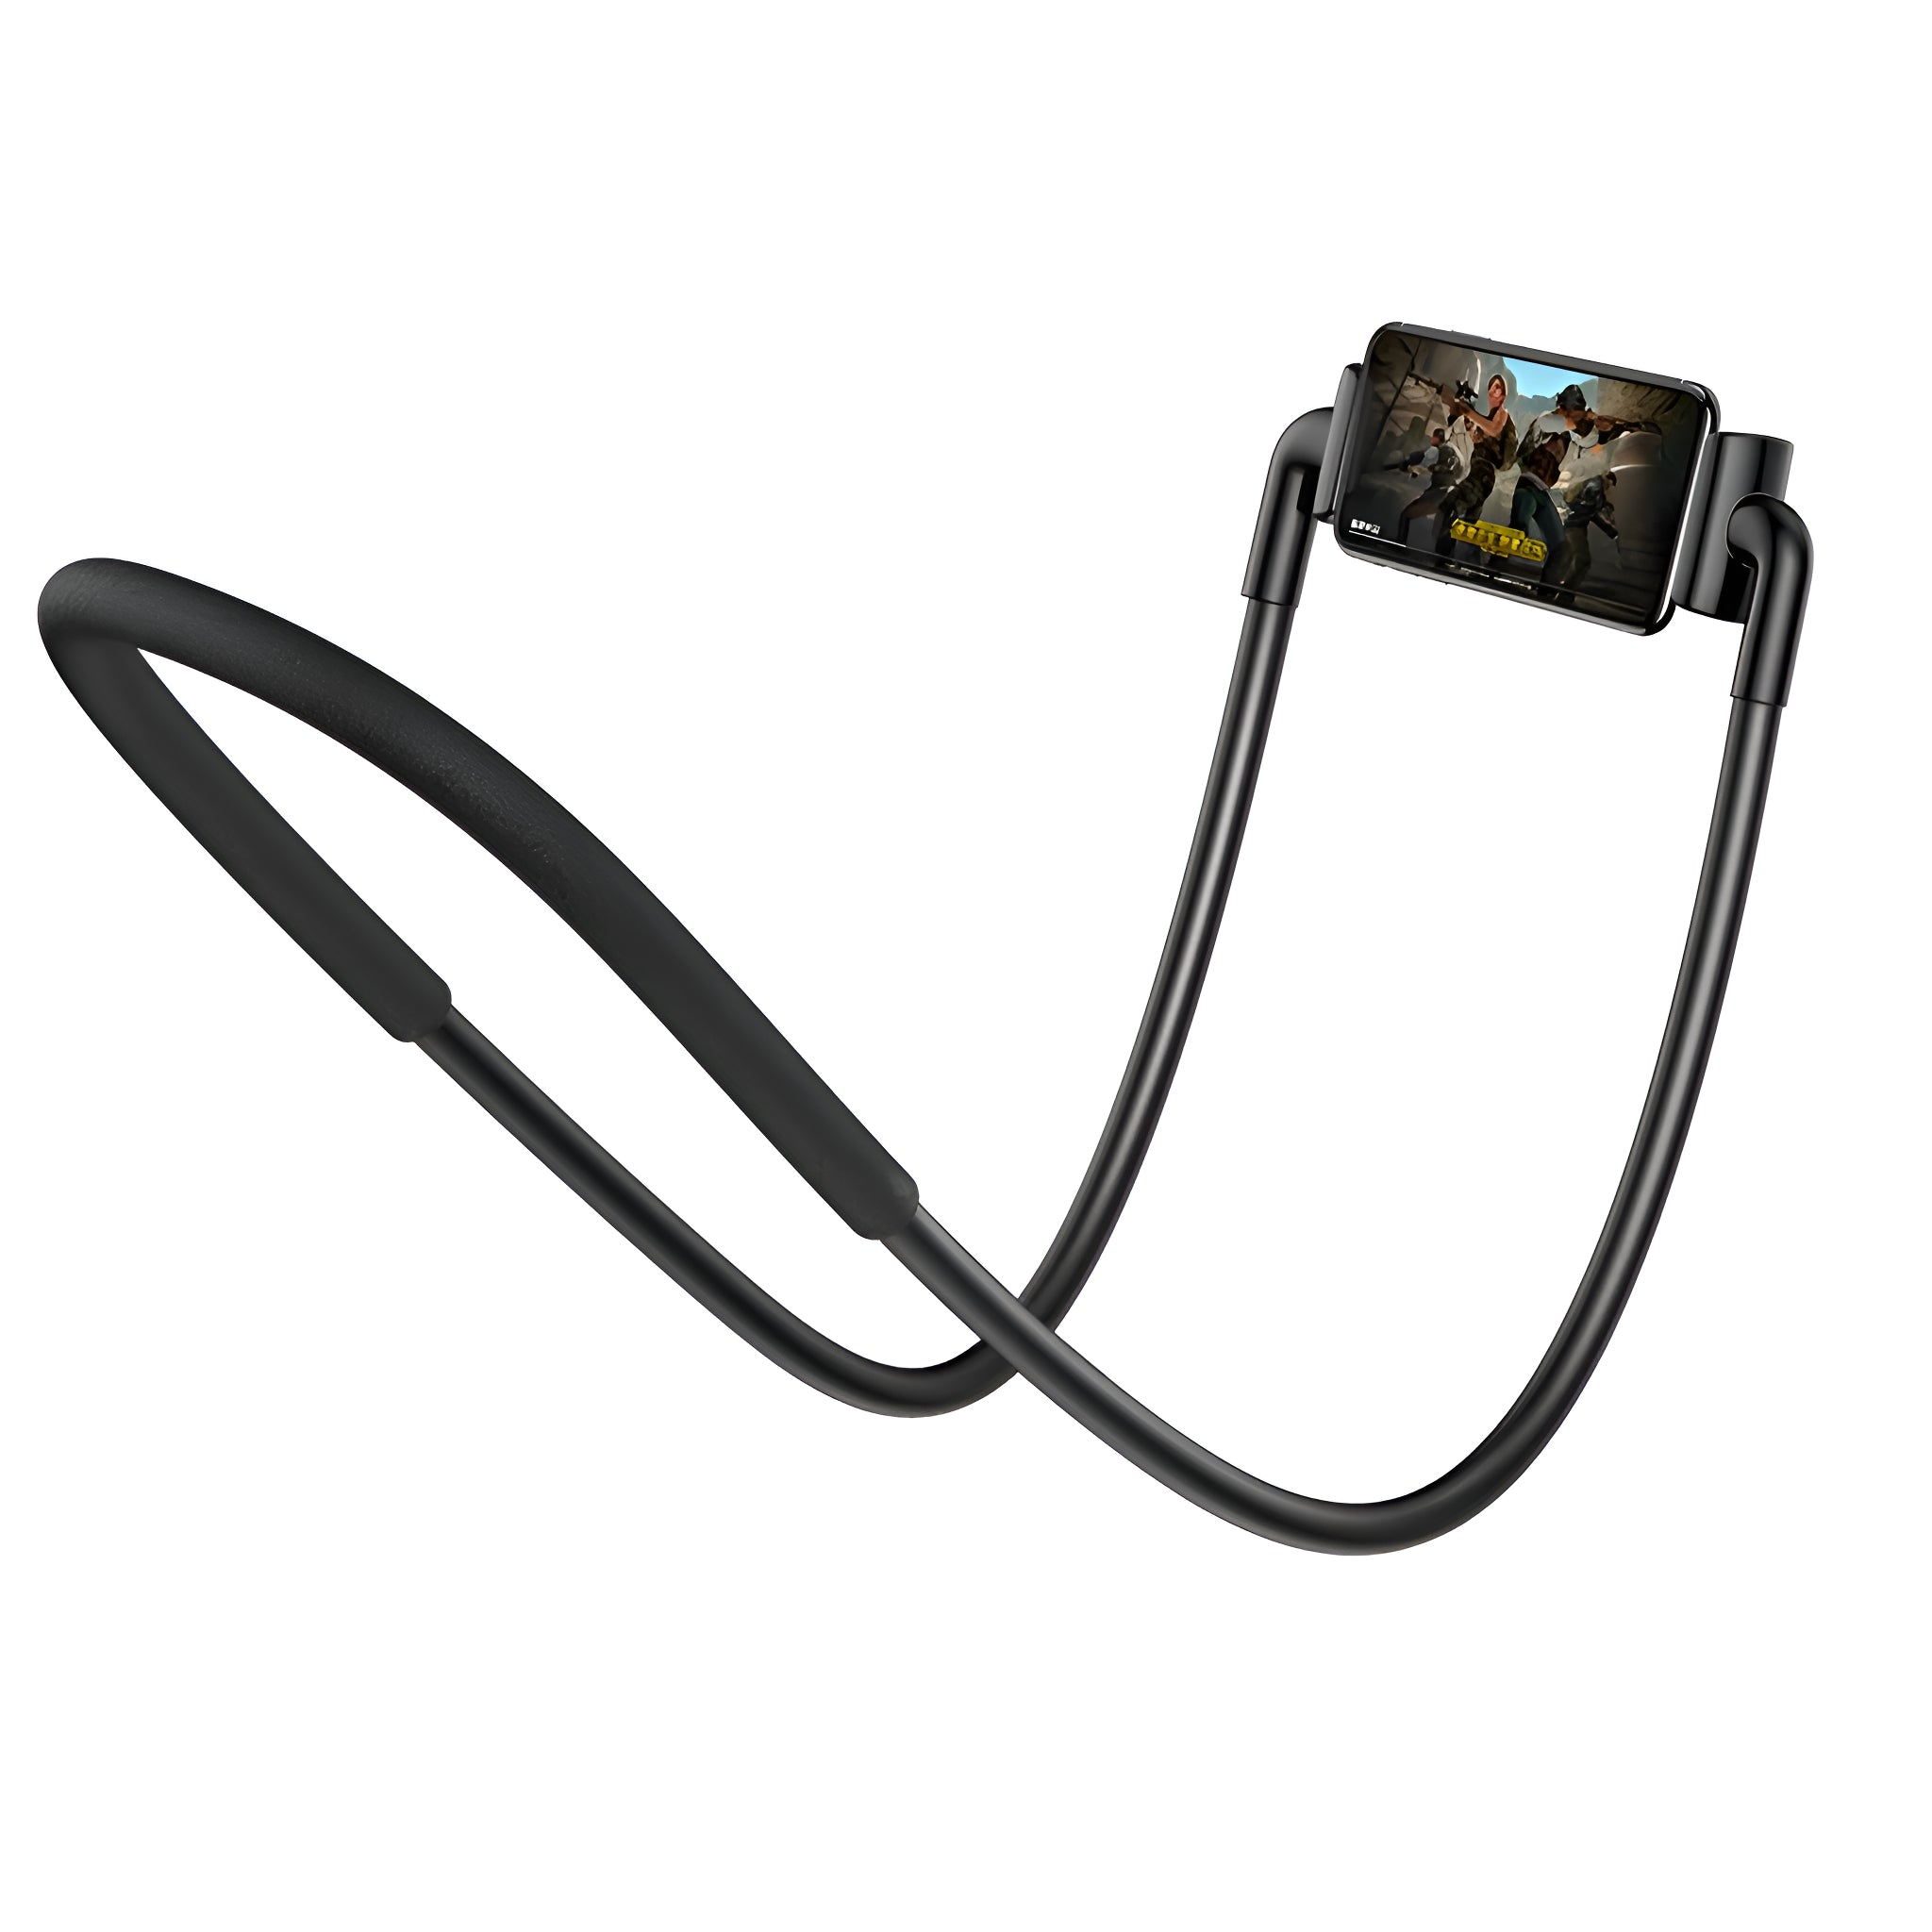 Baseus Aluminium Lazy Neck Phone Holder Hanging Mobile Tablet Support For Video Movie Watching